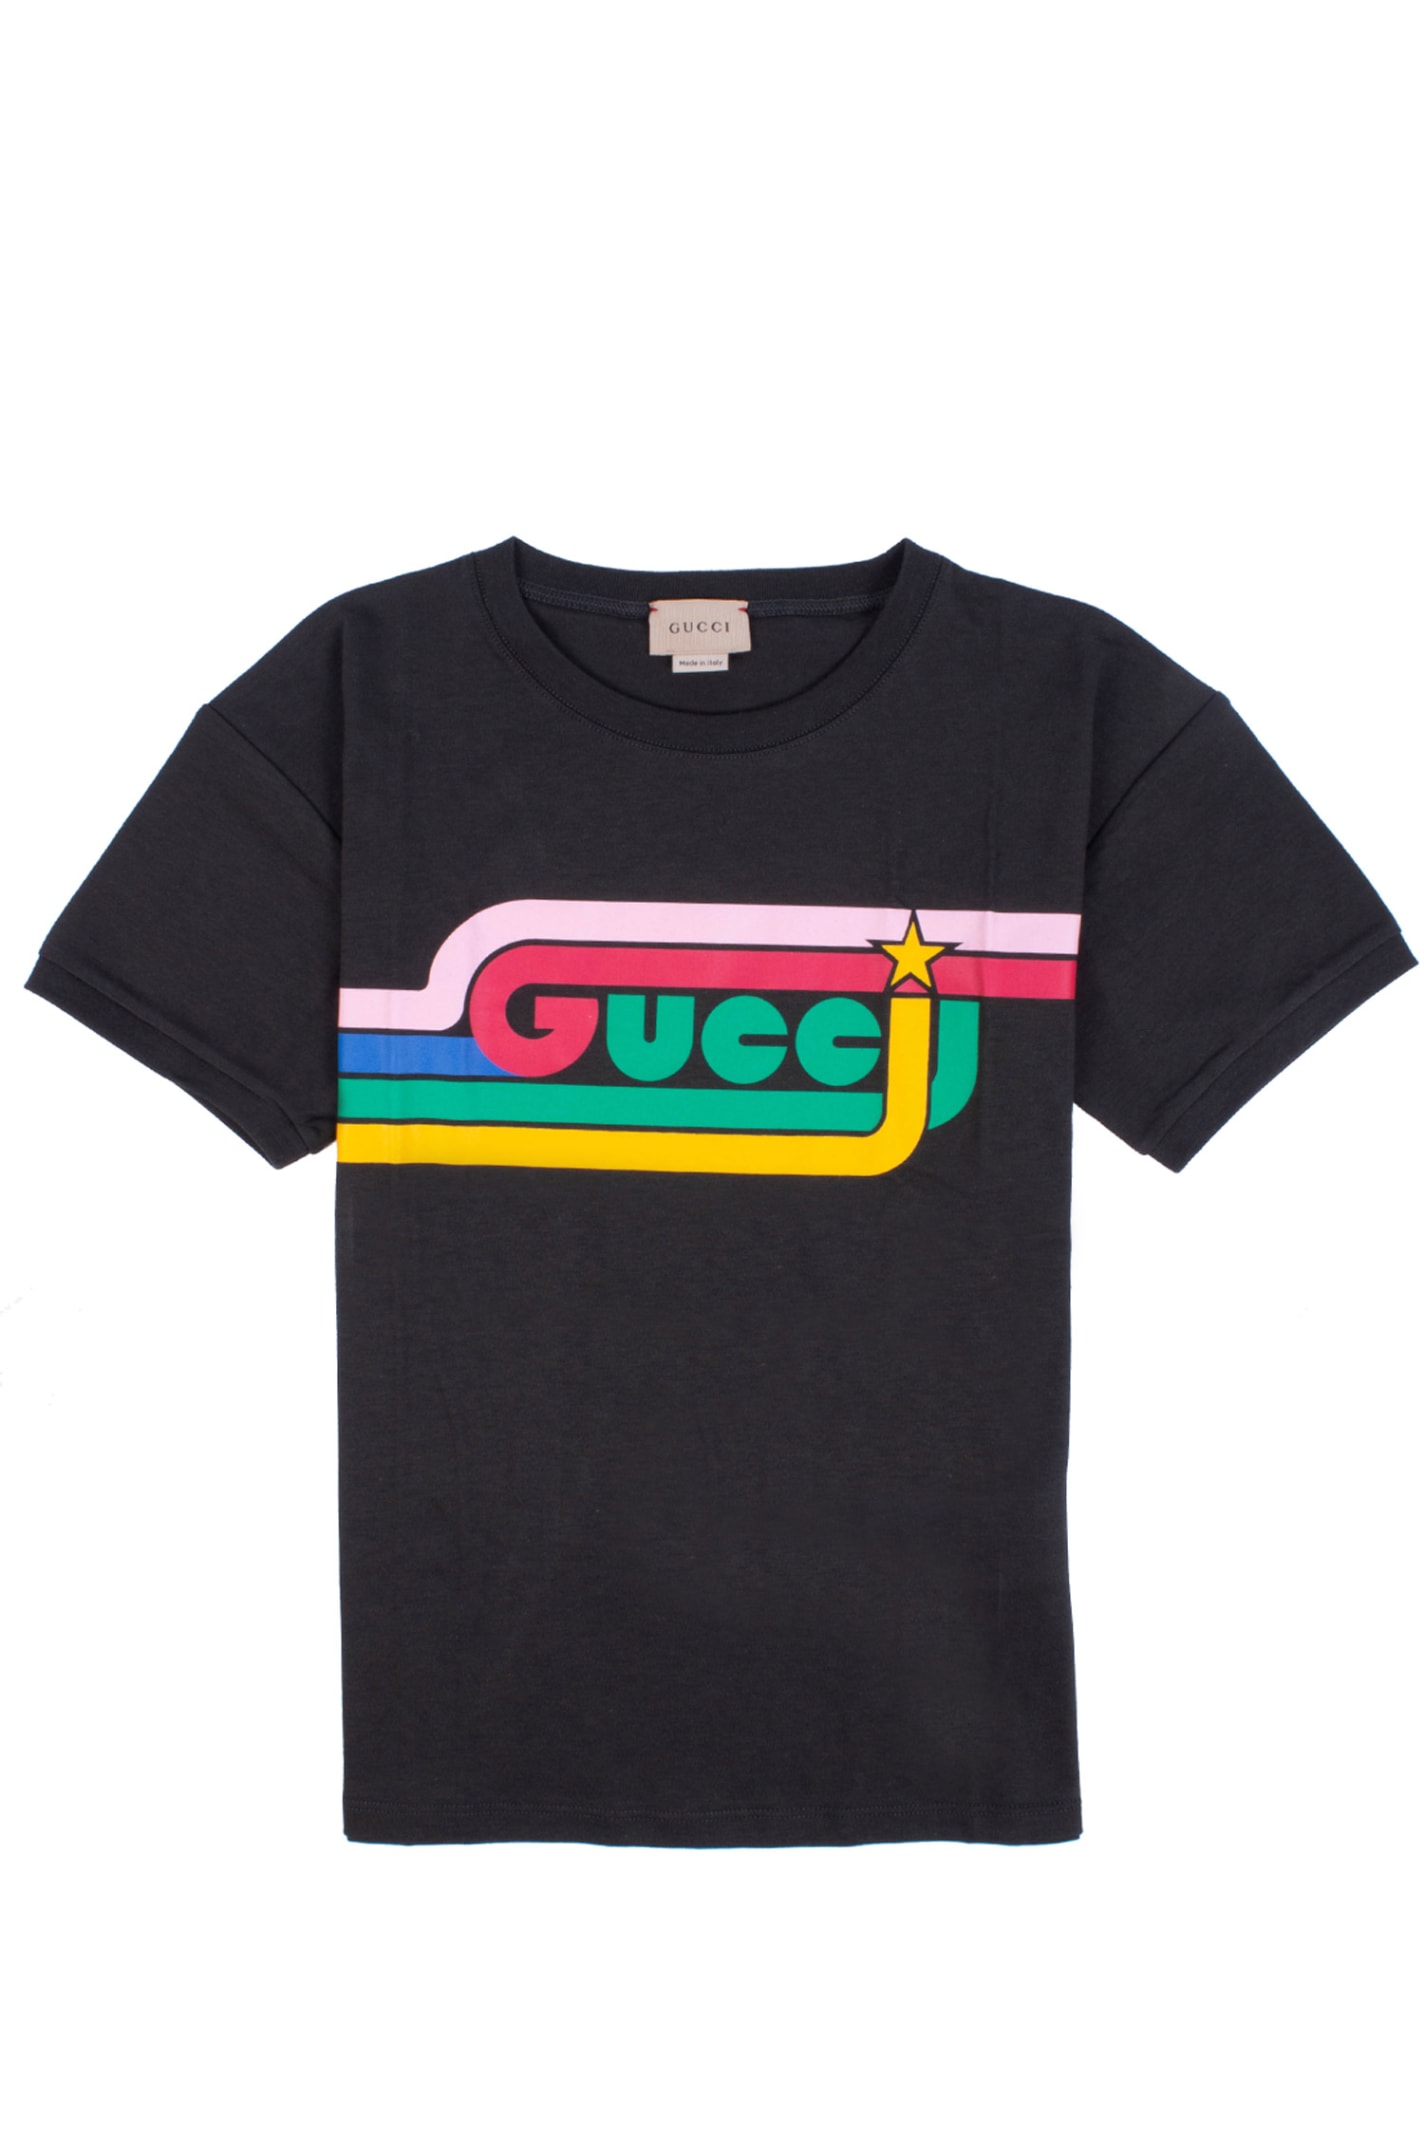 Gucci Cotton T-shirt With Print